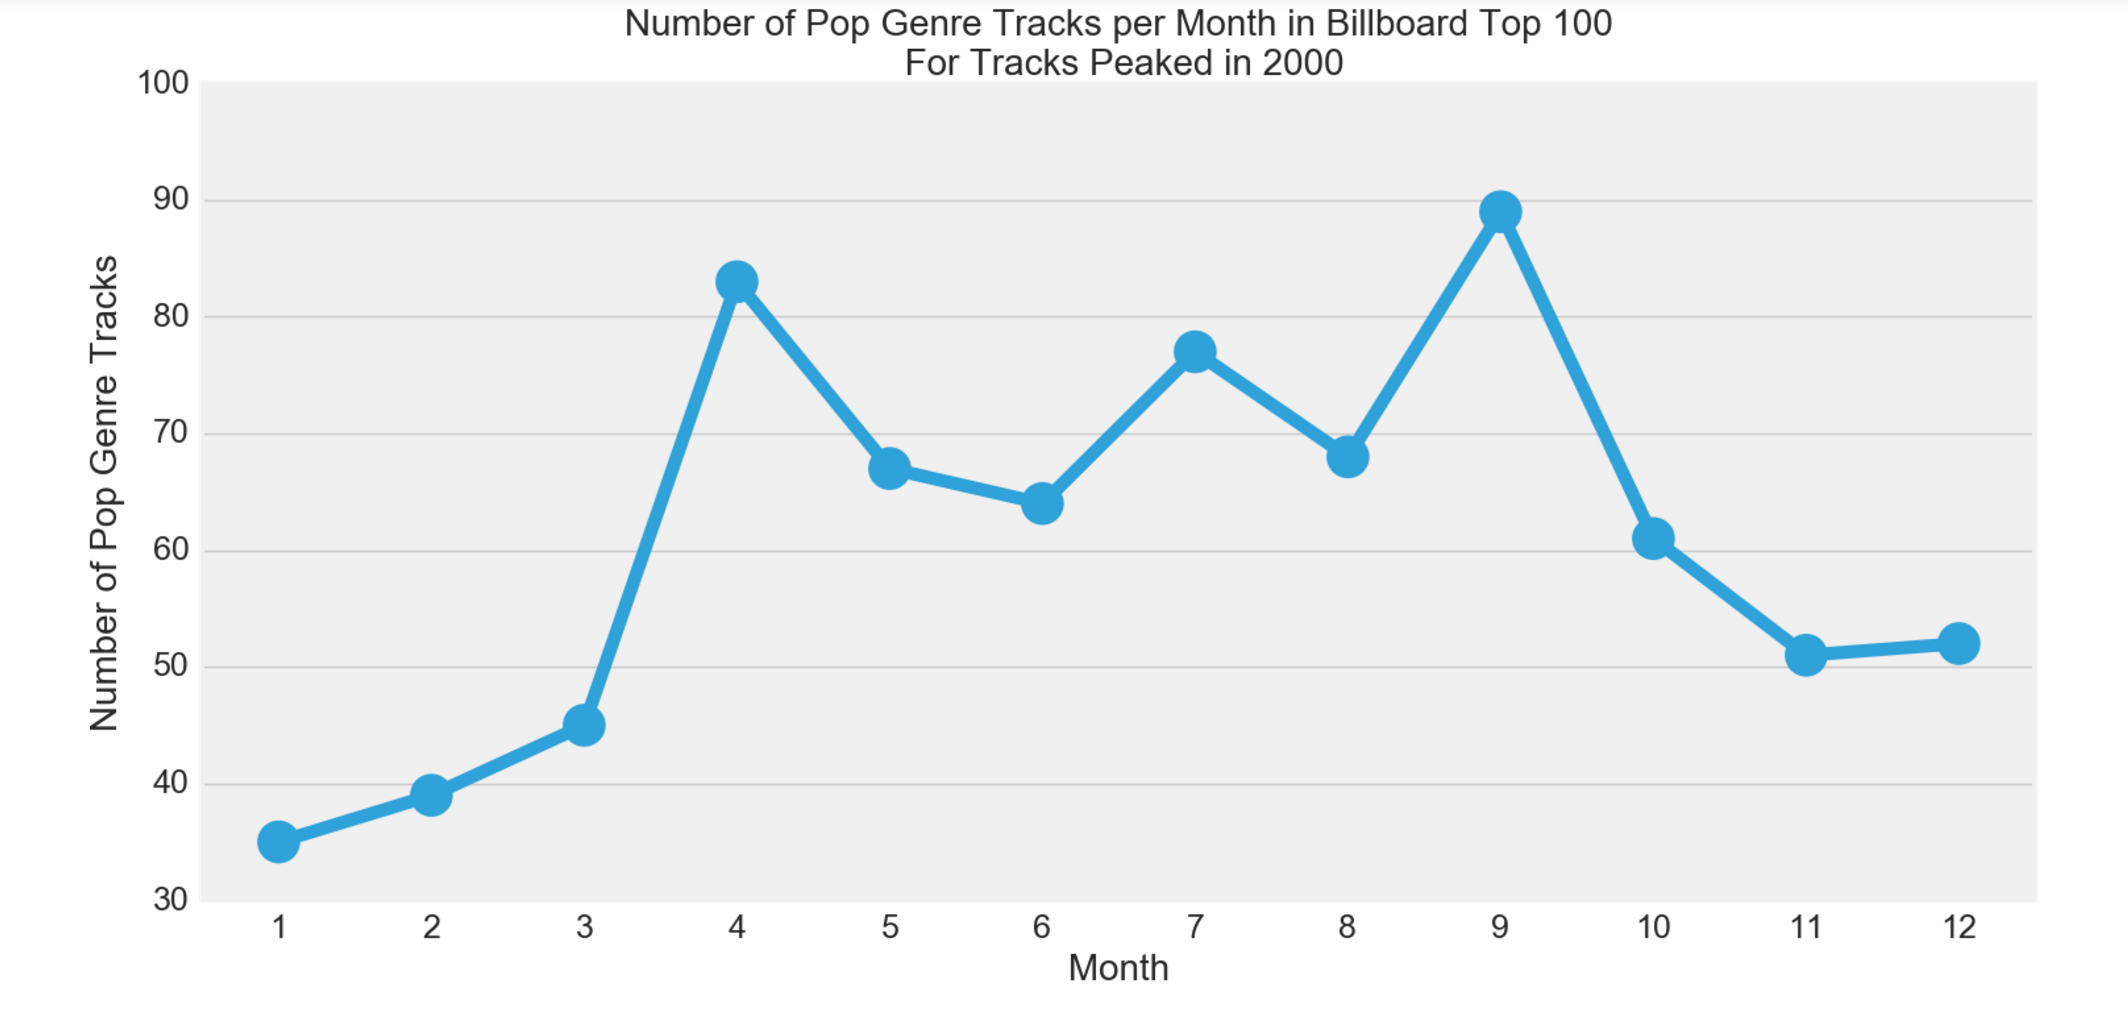 Number of Pop Genre Tracks by Month